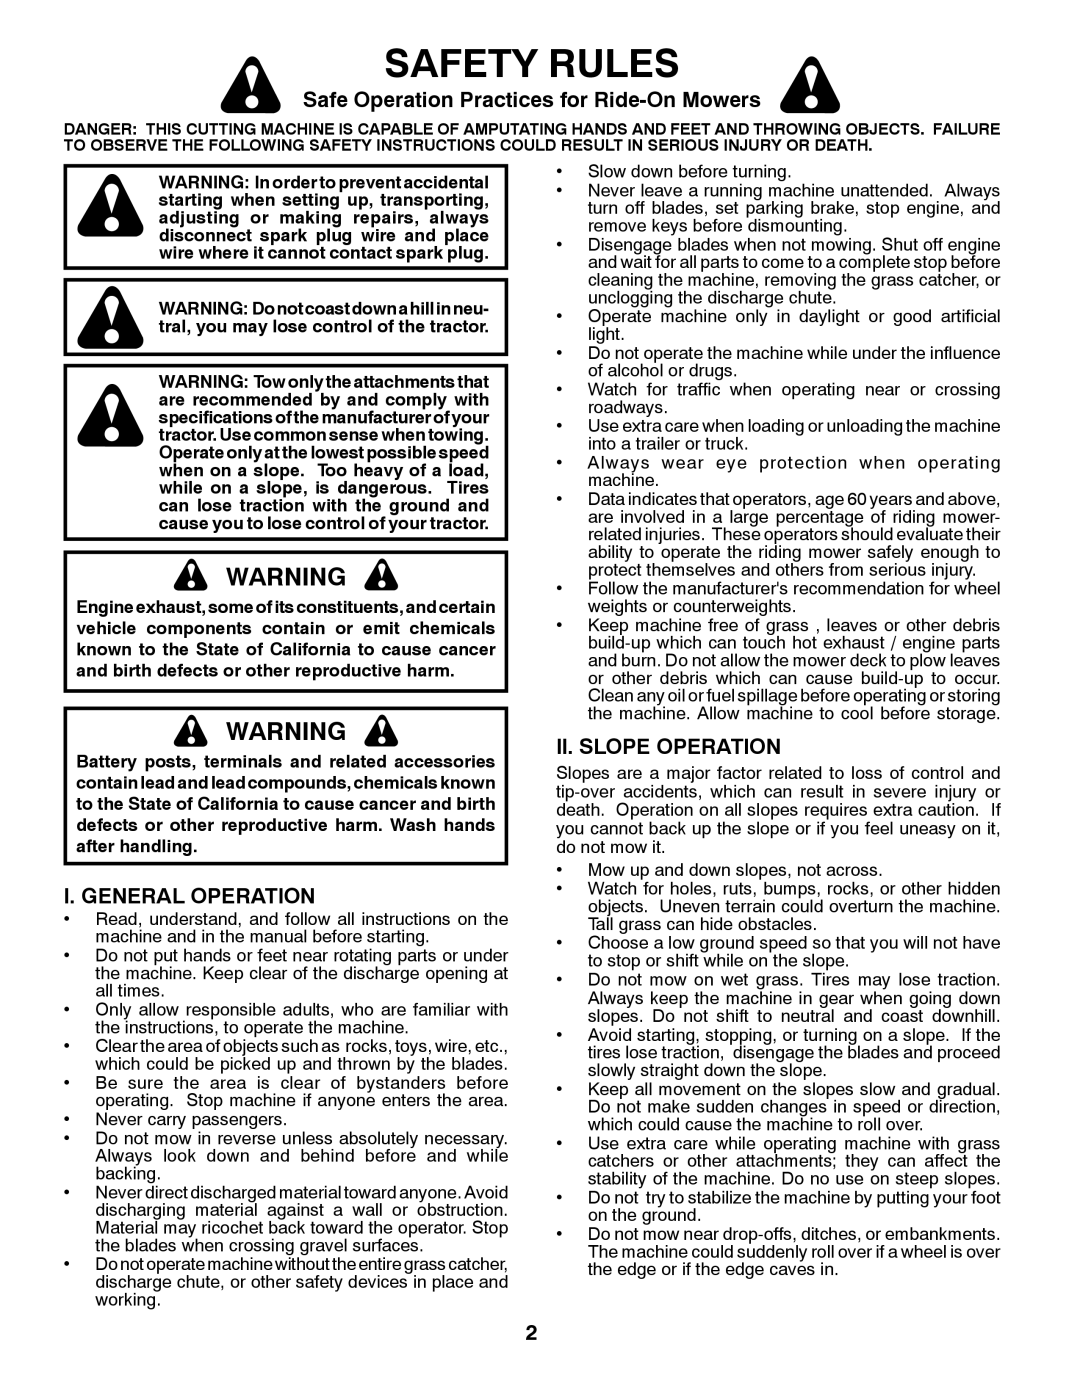 Husqvarna 96045003000 Safety Rules, Safe Operation Practices for Ride-On Mowers, I. General Operation, Ii. Slope Operation 